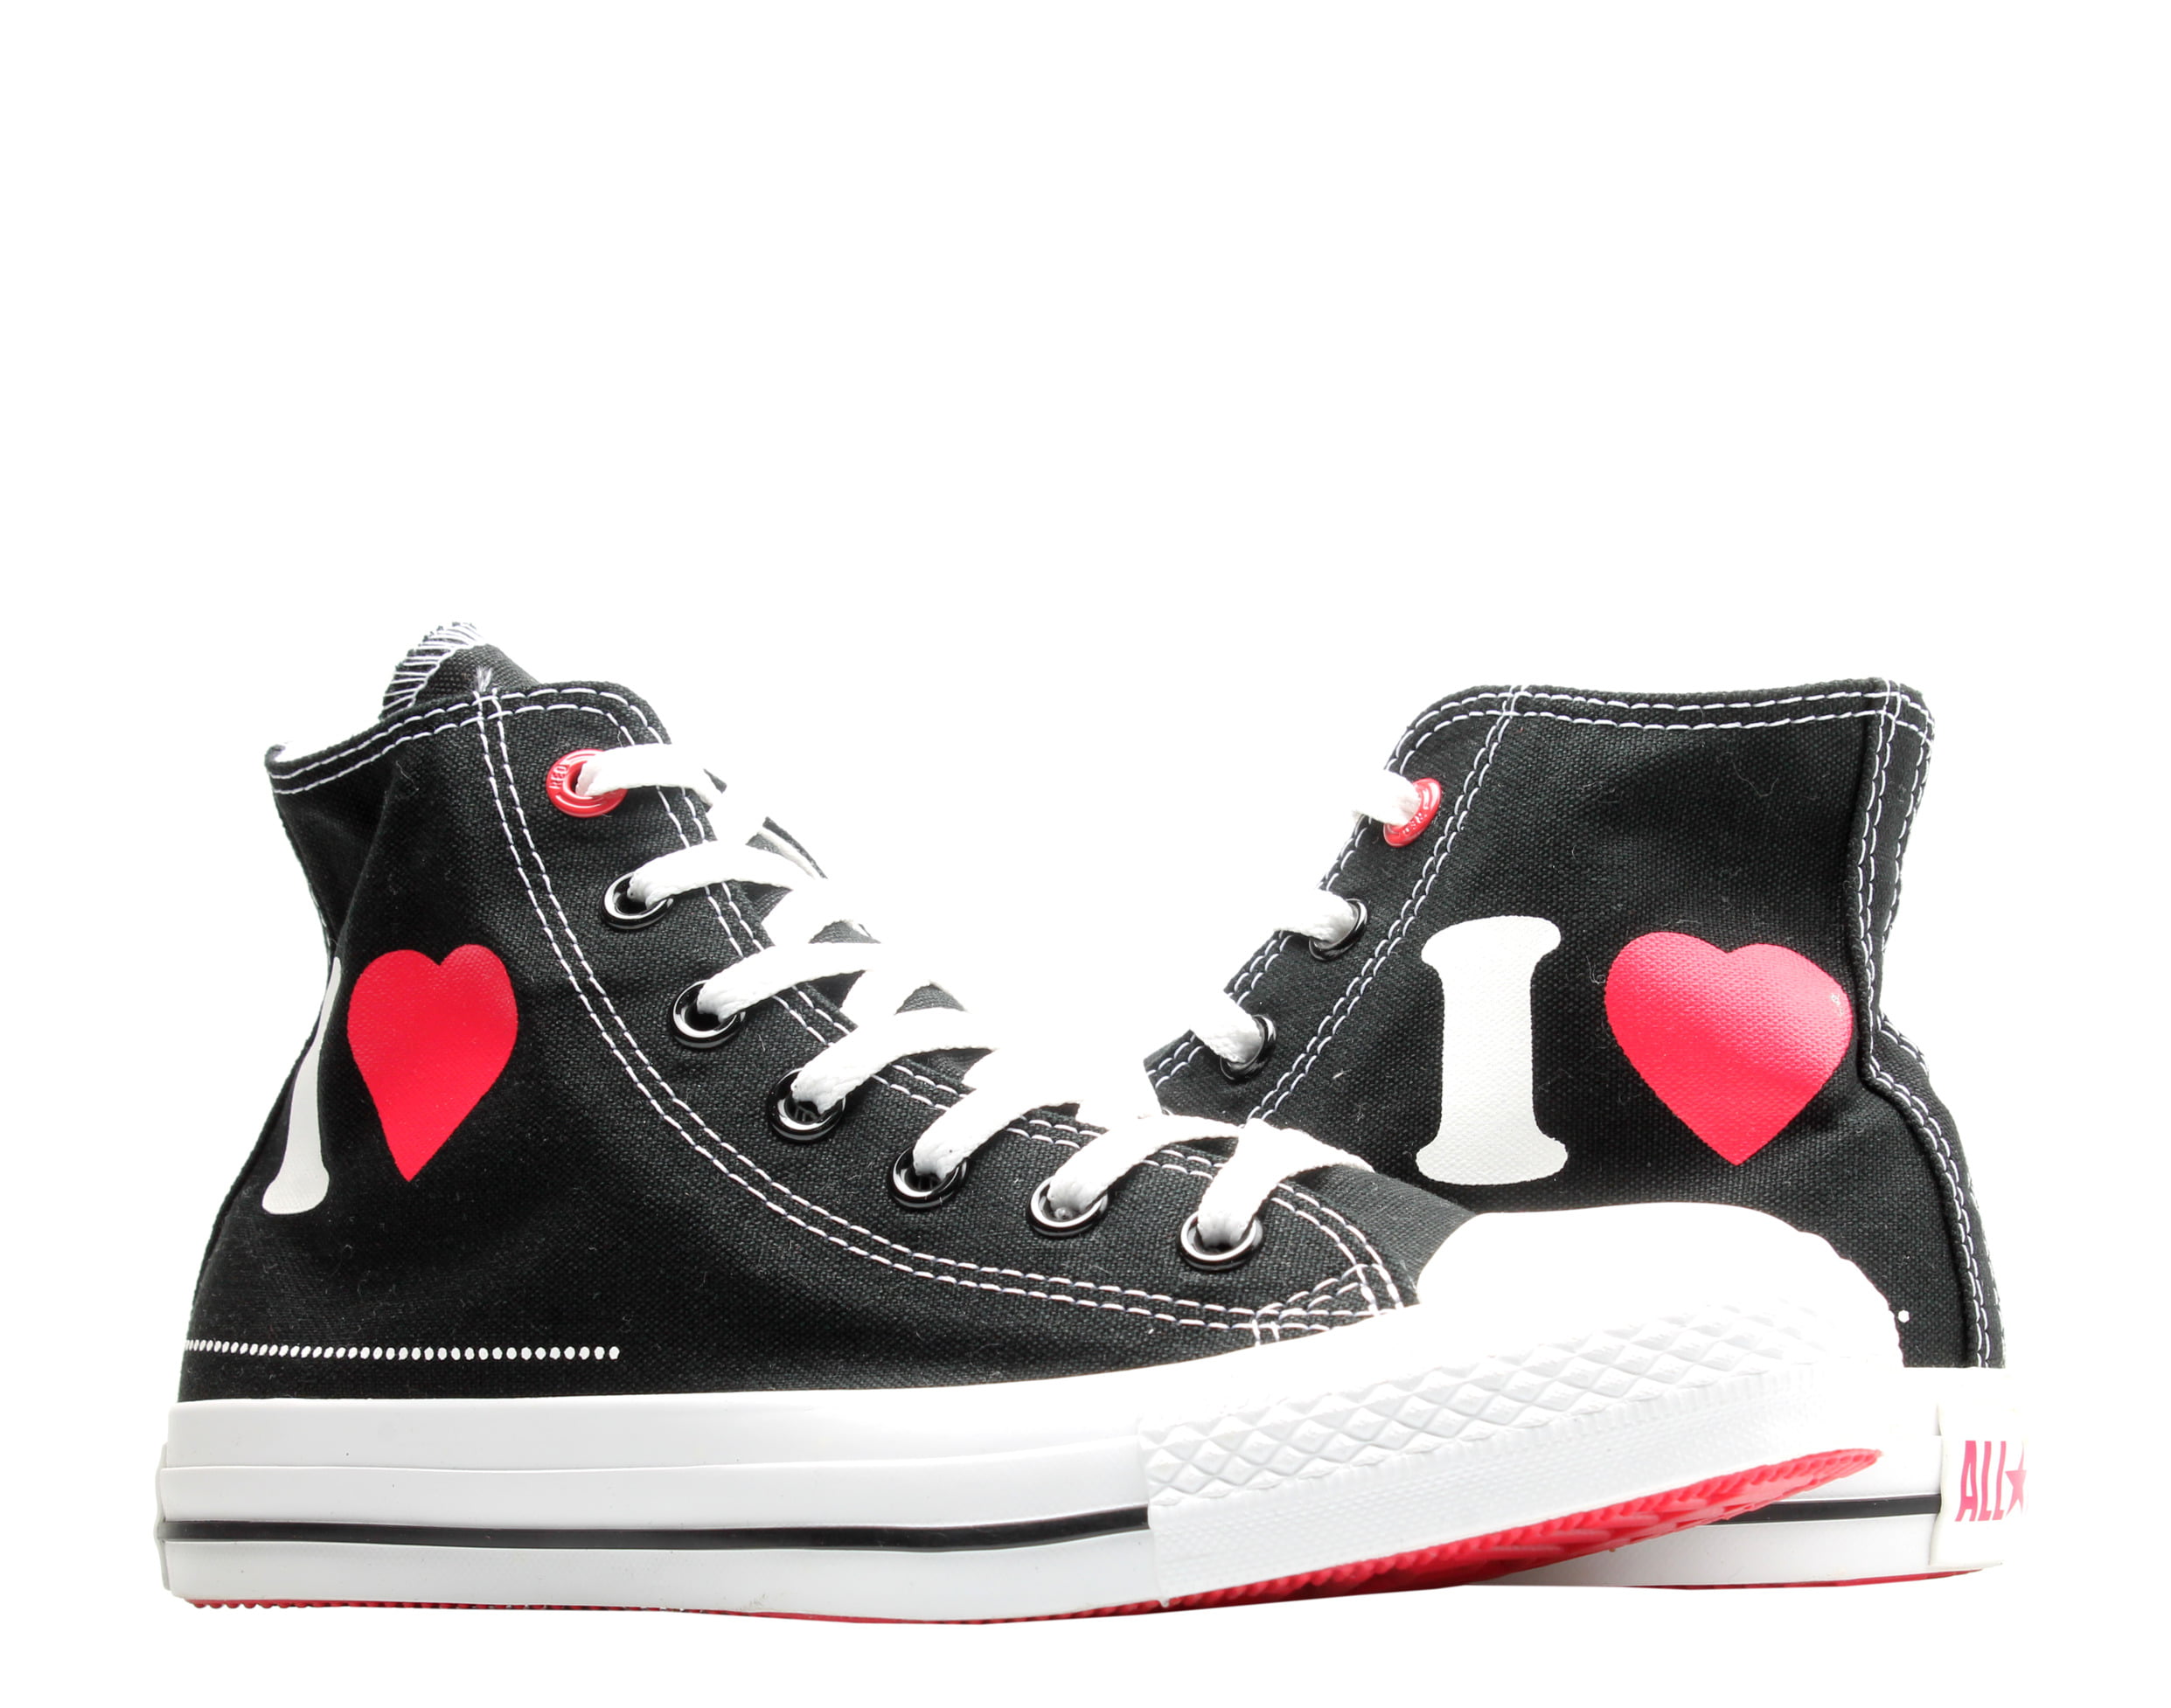 converse red product